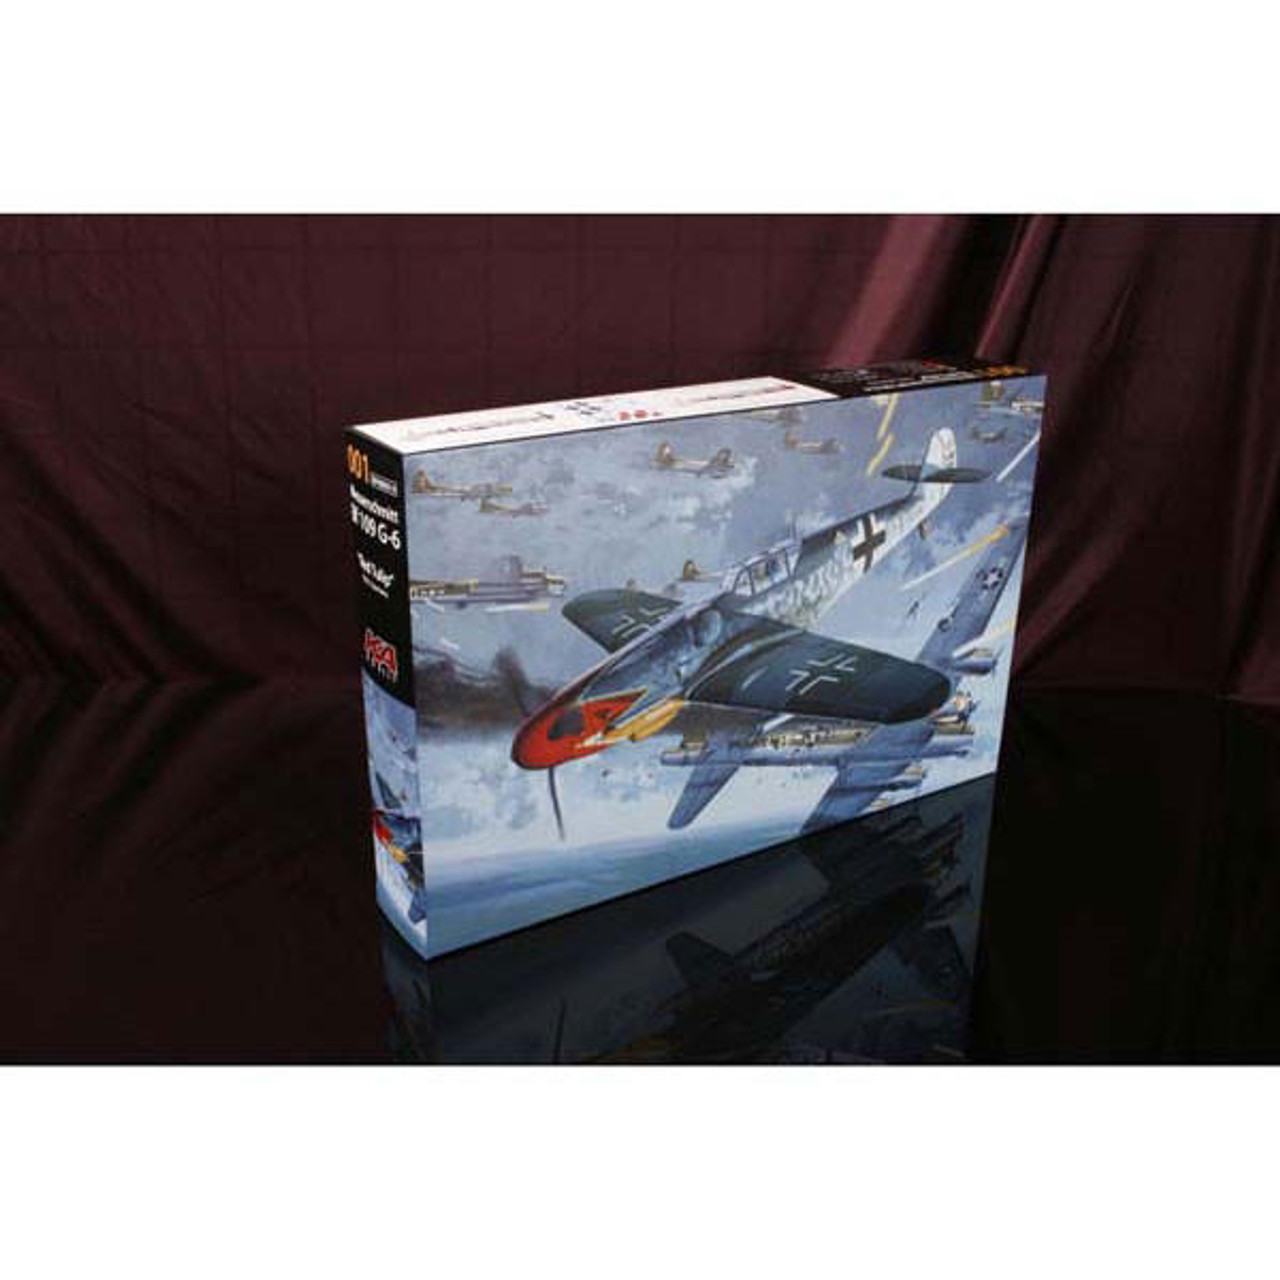 KAM-KP48001A 1/48 KA Models - MESSERSCHMITT Bf 109G-6 Red Tulip (Mixed Media Kit) (Includes markings for 2 a/c)  MMD Squadron